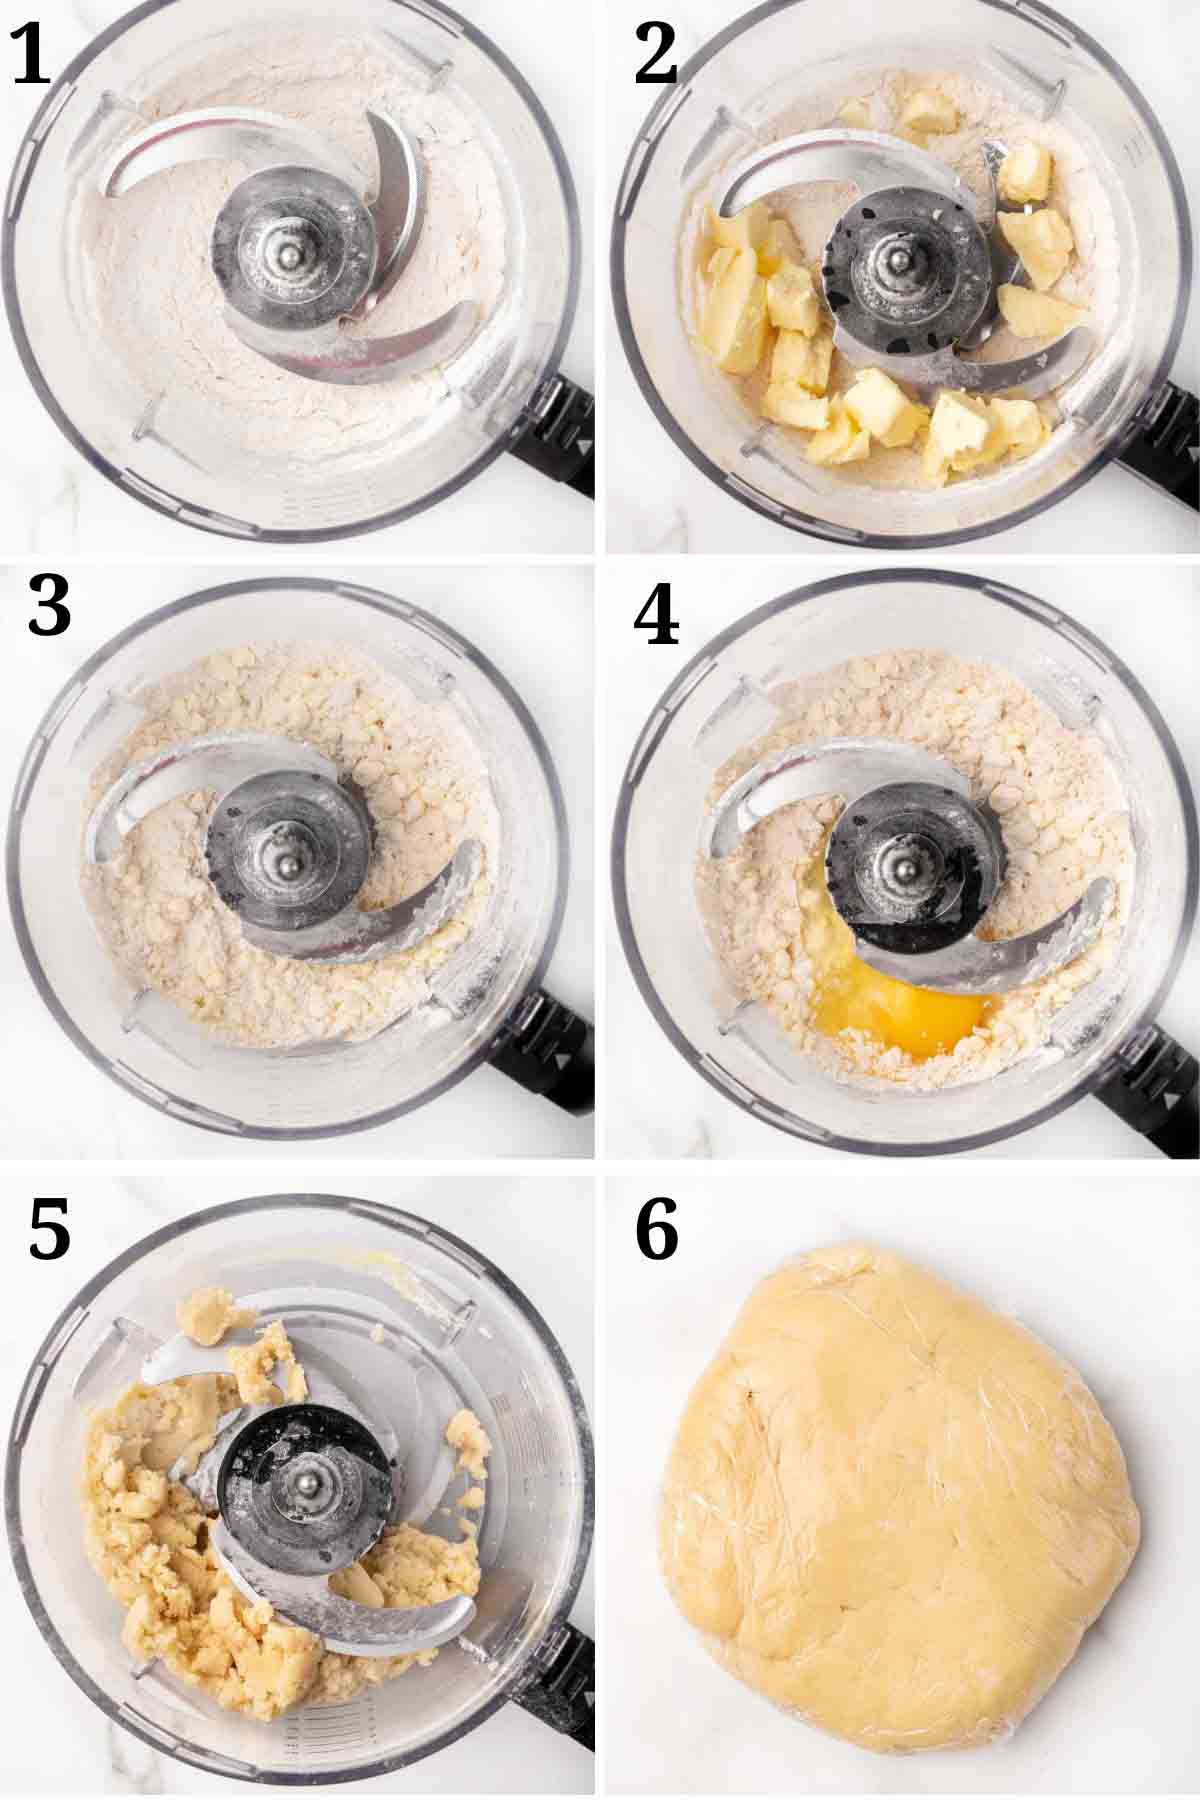 6 images showing how to make pie dough in a food processor.